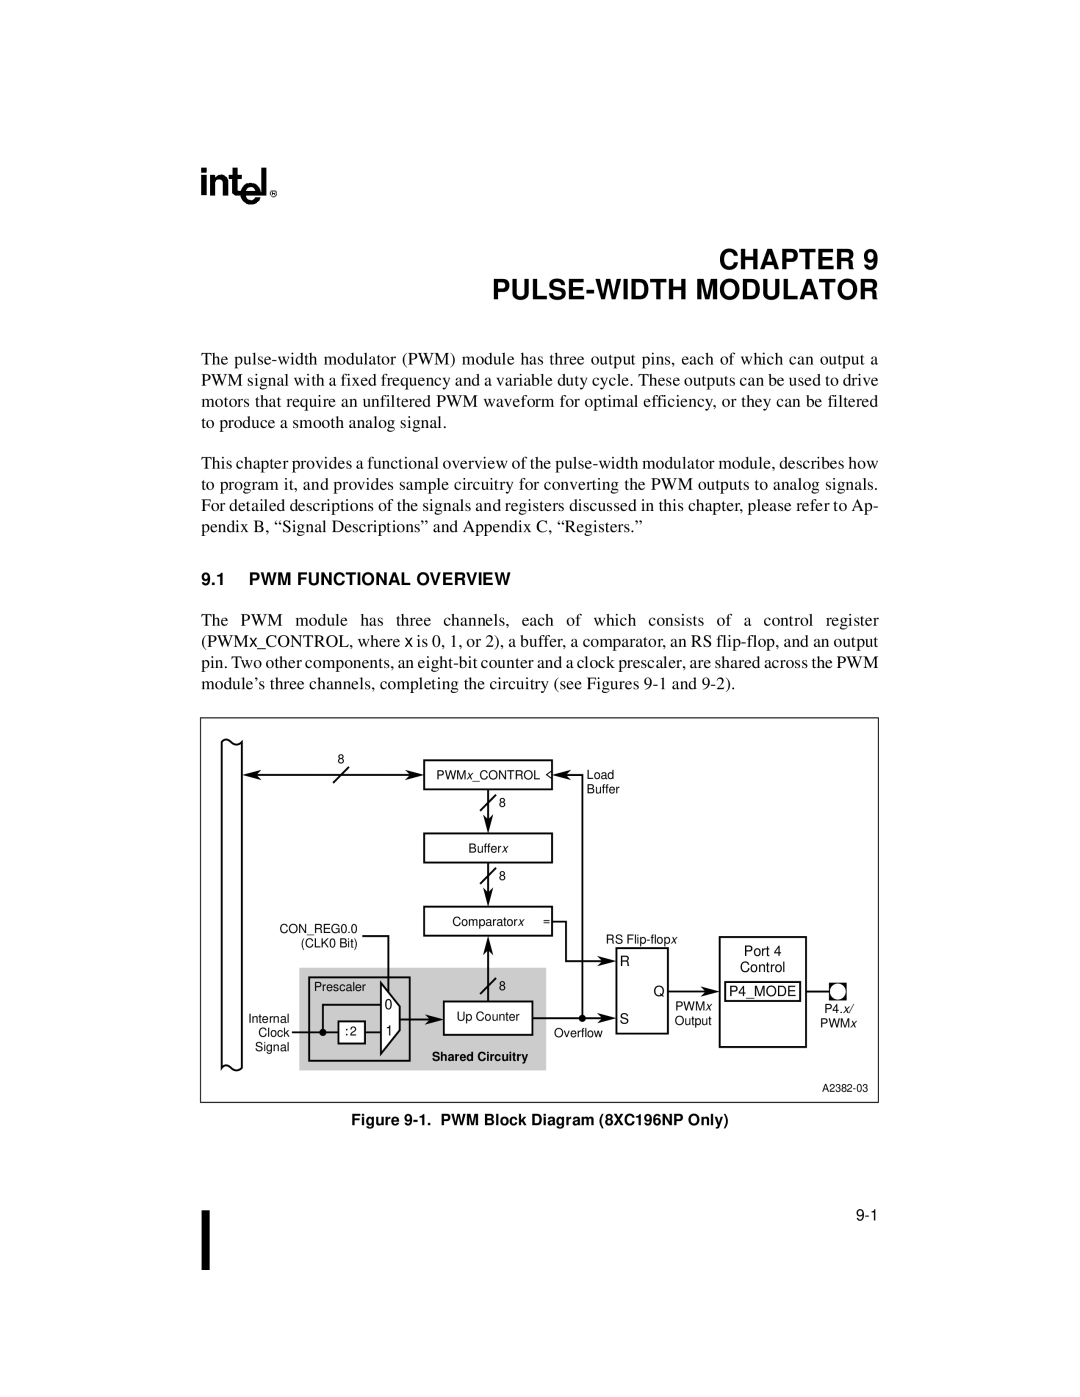 Intel 80C196NU, Microcontroller manual PWM Functional Overview, PWM Block Diagram 8XC196NP Only 